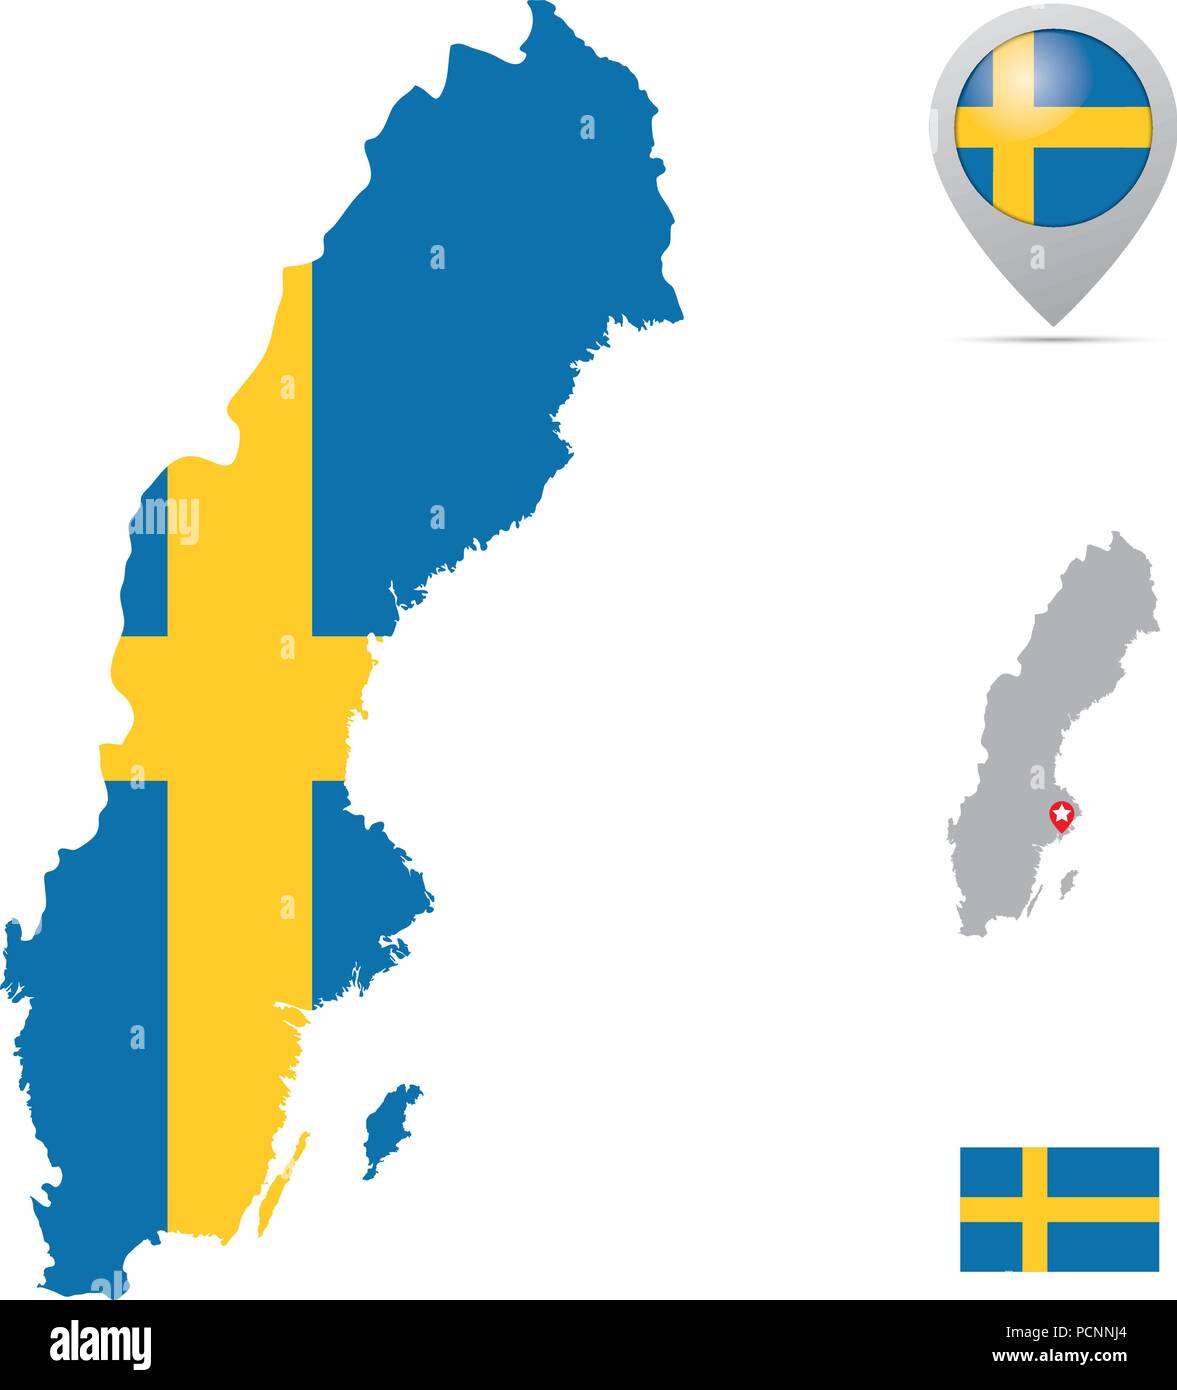 Sweden map in national flag colors, flag,  marker and location of capital. Stock Vector